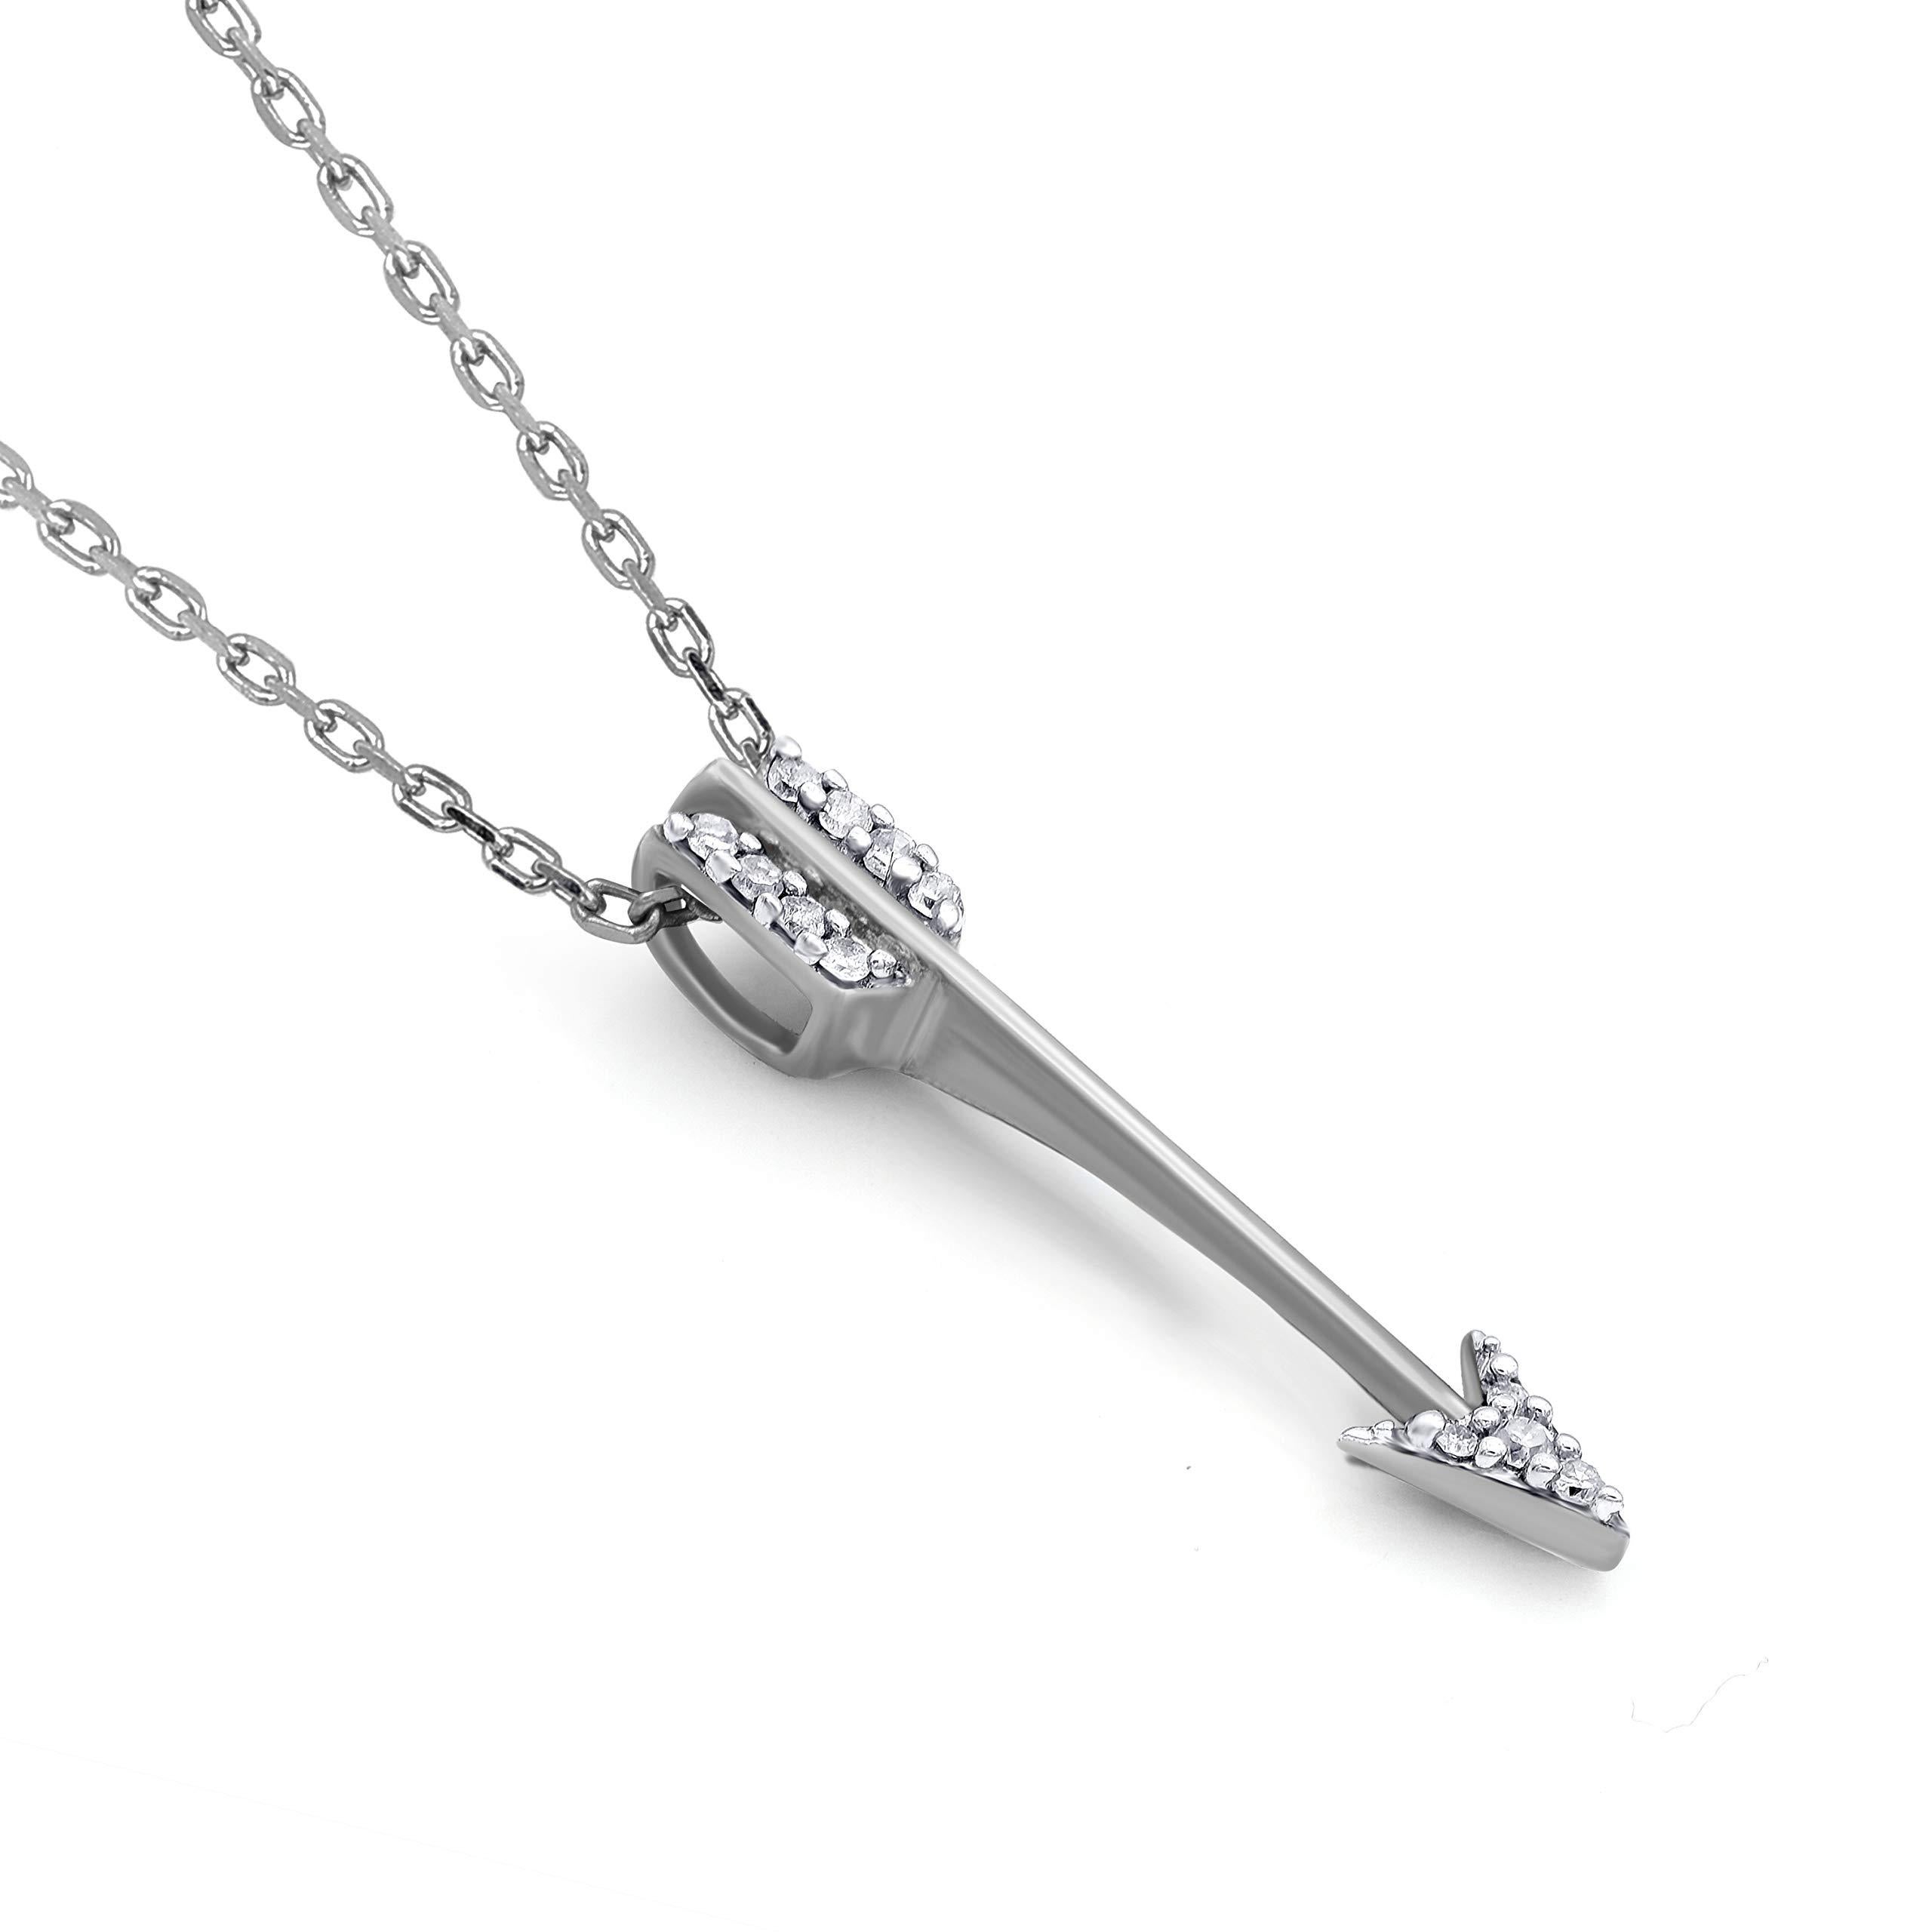 A striking addition when worn on its own, this diamond pendant makes a stunning impression. This arrow pendant is crafted from 14-karat white gold and features 12 single cut diamonds set in prong setting. H-I color I2 clarity and a high polish